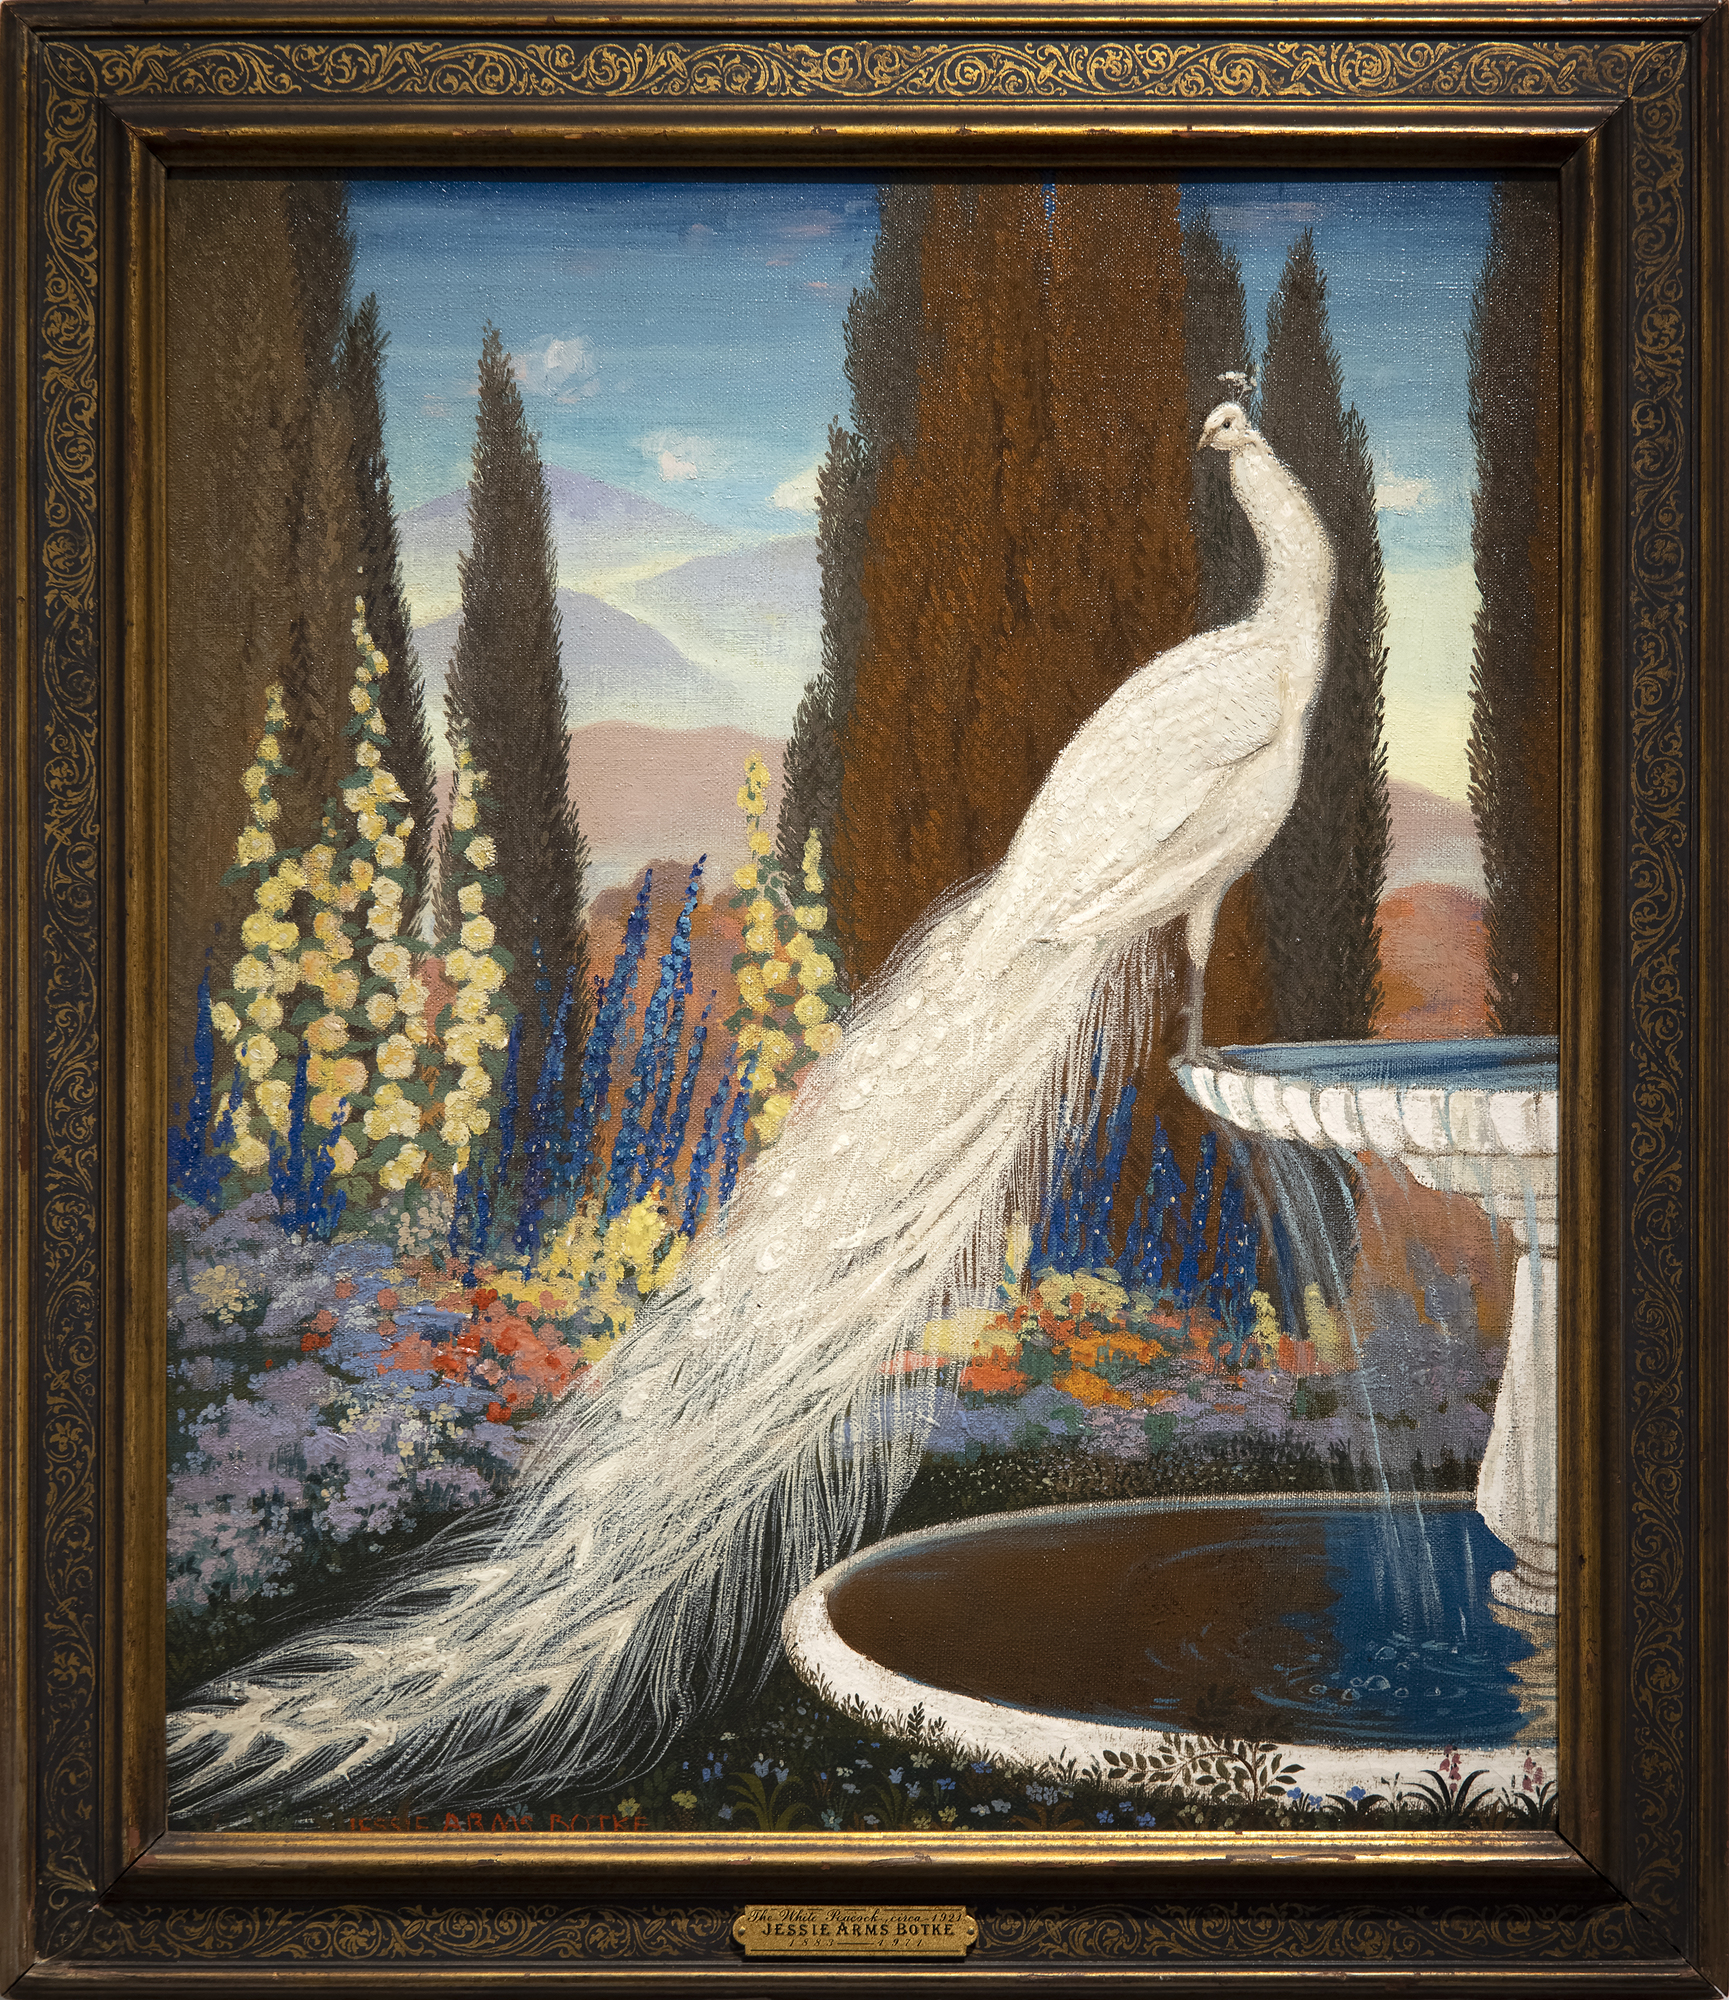 The Arts and Crafts Movement in Great Britain and the corresponding ripples that made their way across the Atlantic Ocean were felt in the work of Jesse Arms Botke (1883-1971).  Botke was born in Chicago, Illinois but found her home in California, where she had a successful career working first in Carmel and later in Southern California. &lt;br&gt;&lt;br&gt;Rich textures, extensive use of gold leaf, and highly stylized birds would become synonymous with Botke&#039;s mature work as she established herself as one of the West Coast’s leading decorative mural painters of the 20th century.&lt;br&gt;&lt;br&gt;&quot;The White Peacock&quot; (1922) shows an idyllic landscape with Botke&#039;s signature bird subject matter; the white peacock and cockatoos were among her favorite aviary subjects. Her work today can be found in countless museum collections, including the Art Institute, Chicago.